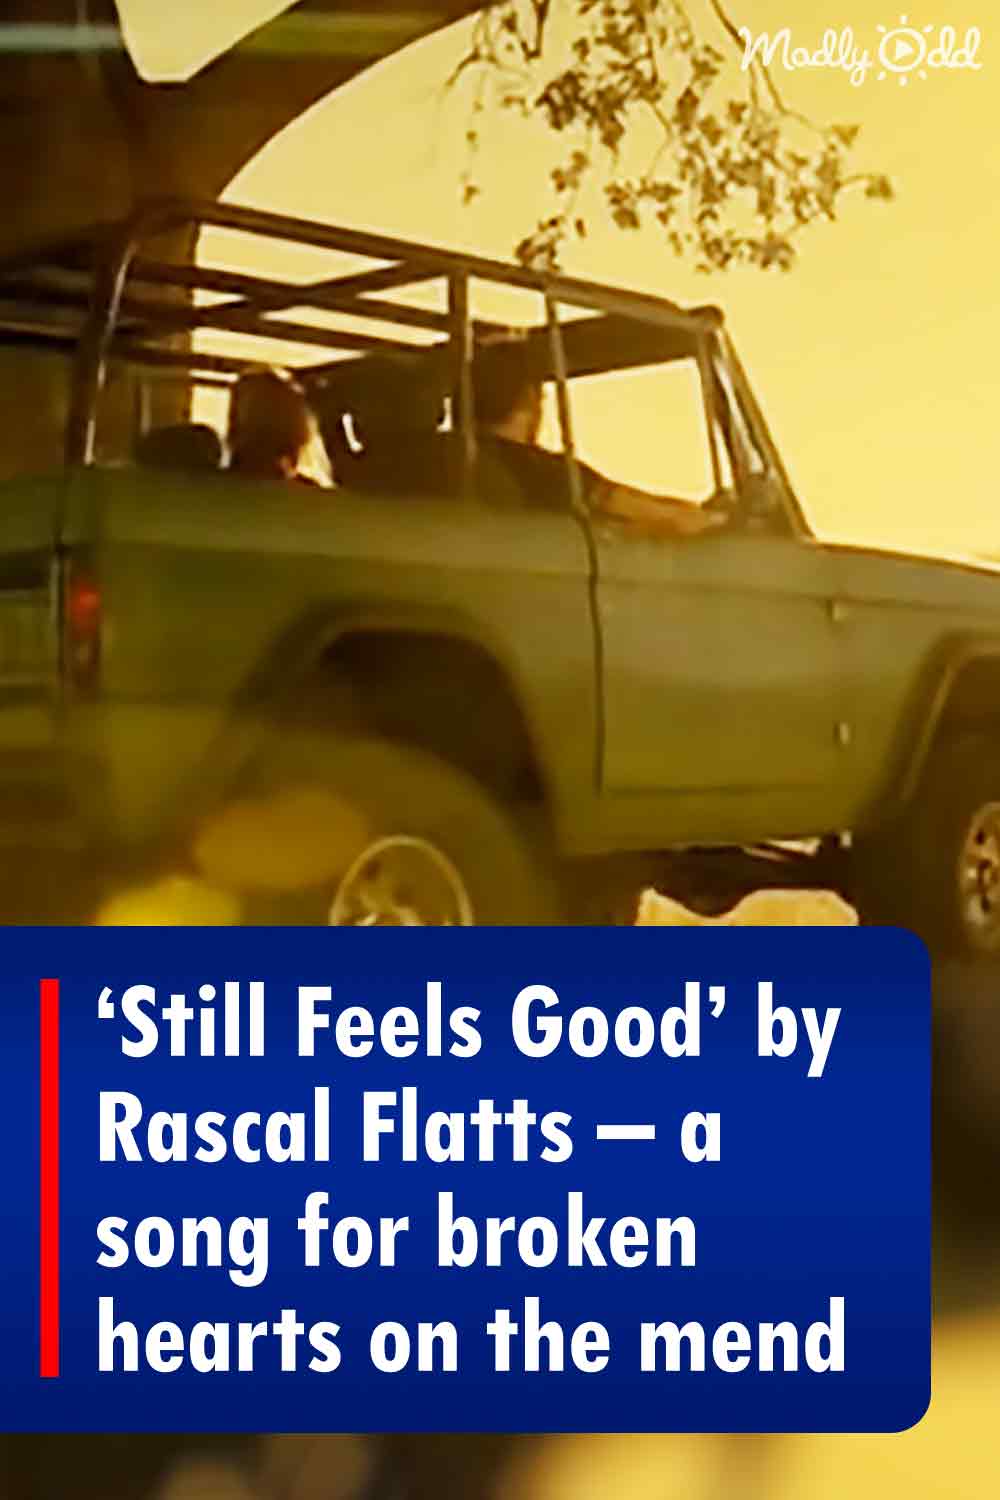 ‘Still Feels Good’ by Rascal Flatts – a song for broken hearts on the mend